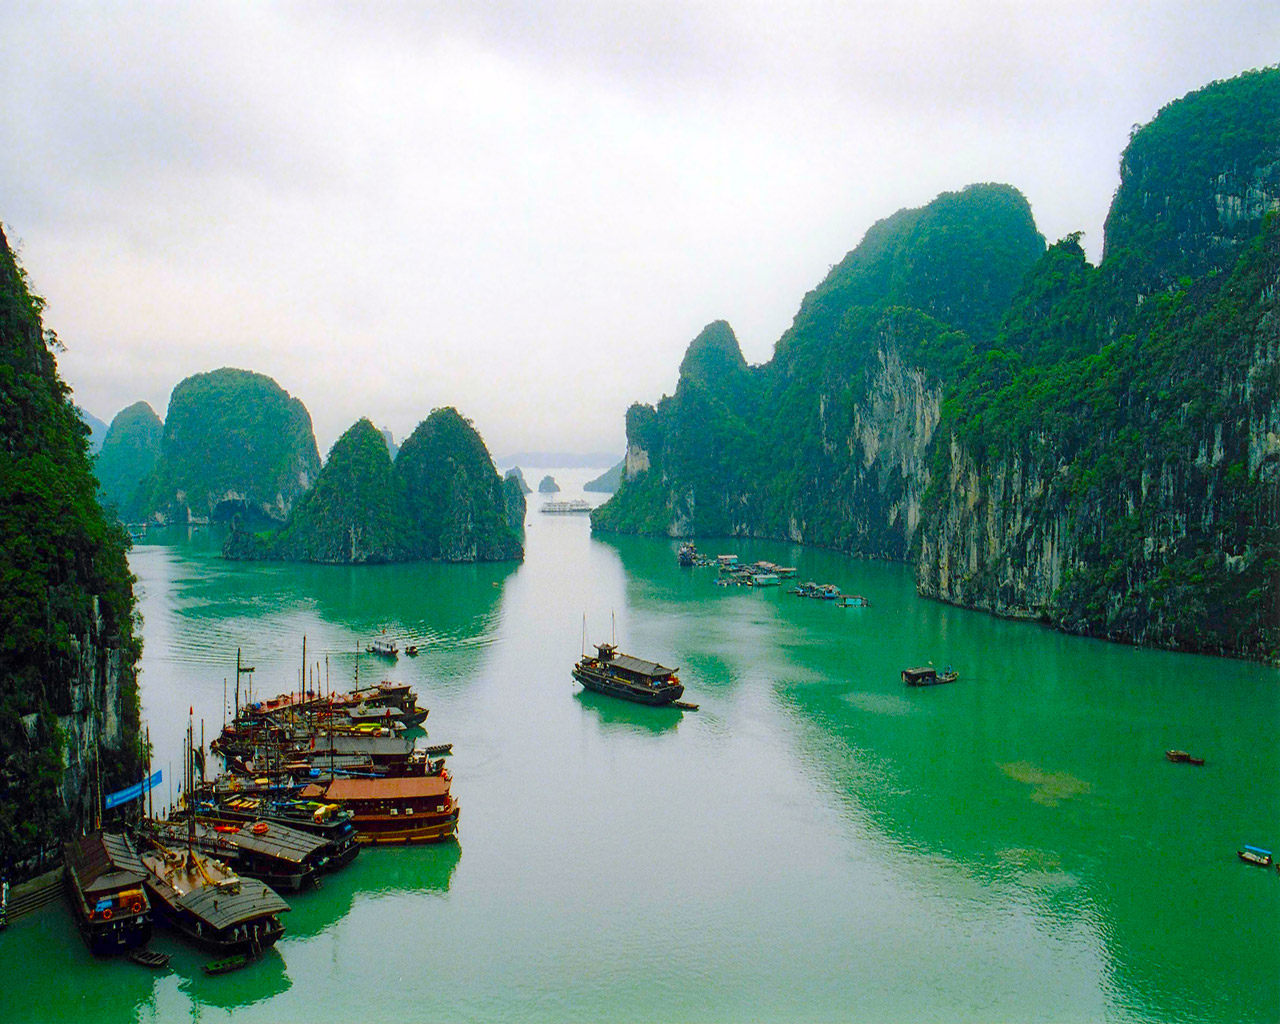 A trip to the islands of Halong Bay in Vietnam is a must.